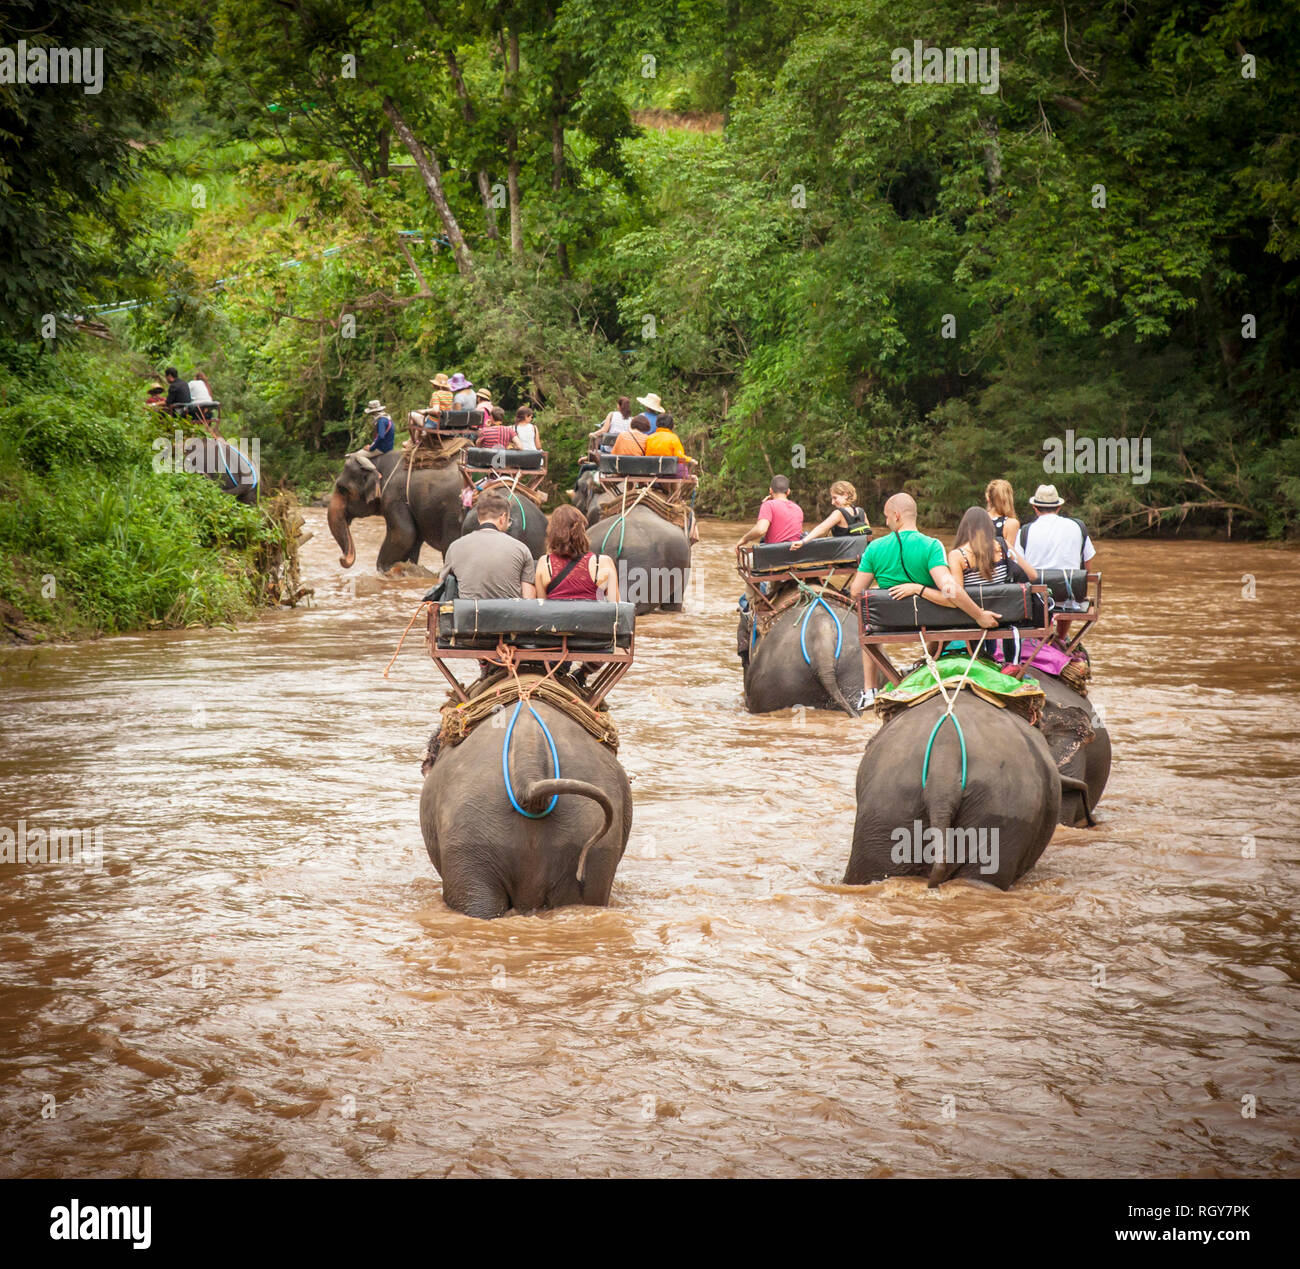 Tourists elephant riding in Chiang Mai (Thailand) Stock Photo